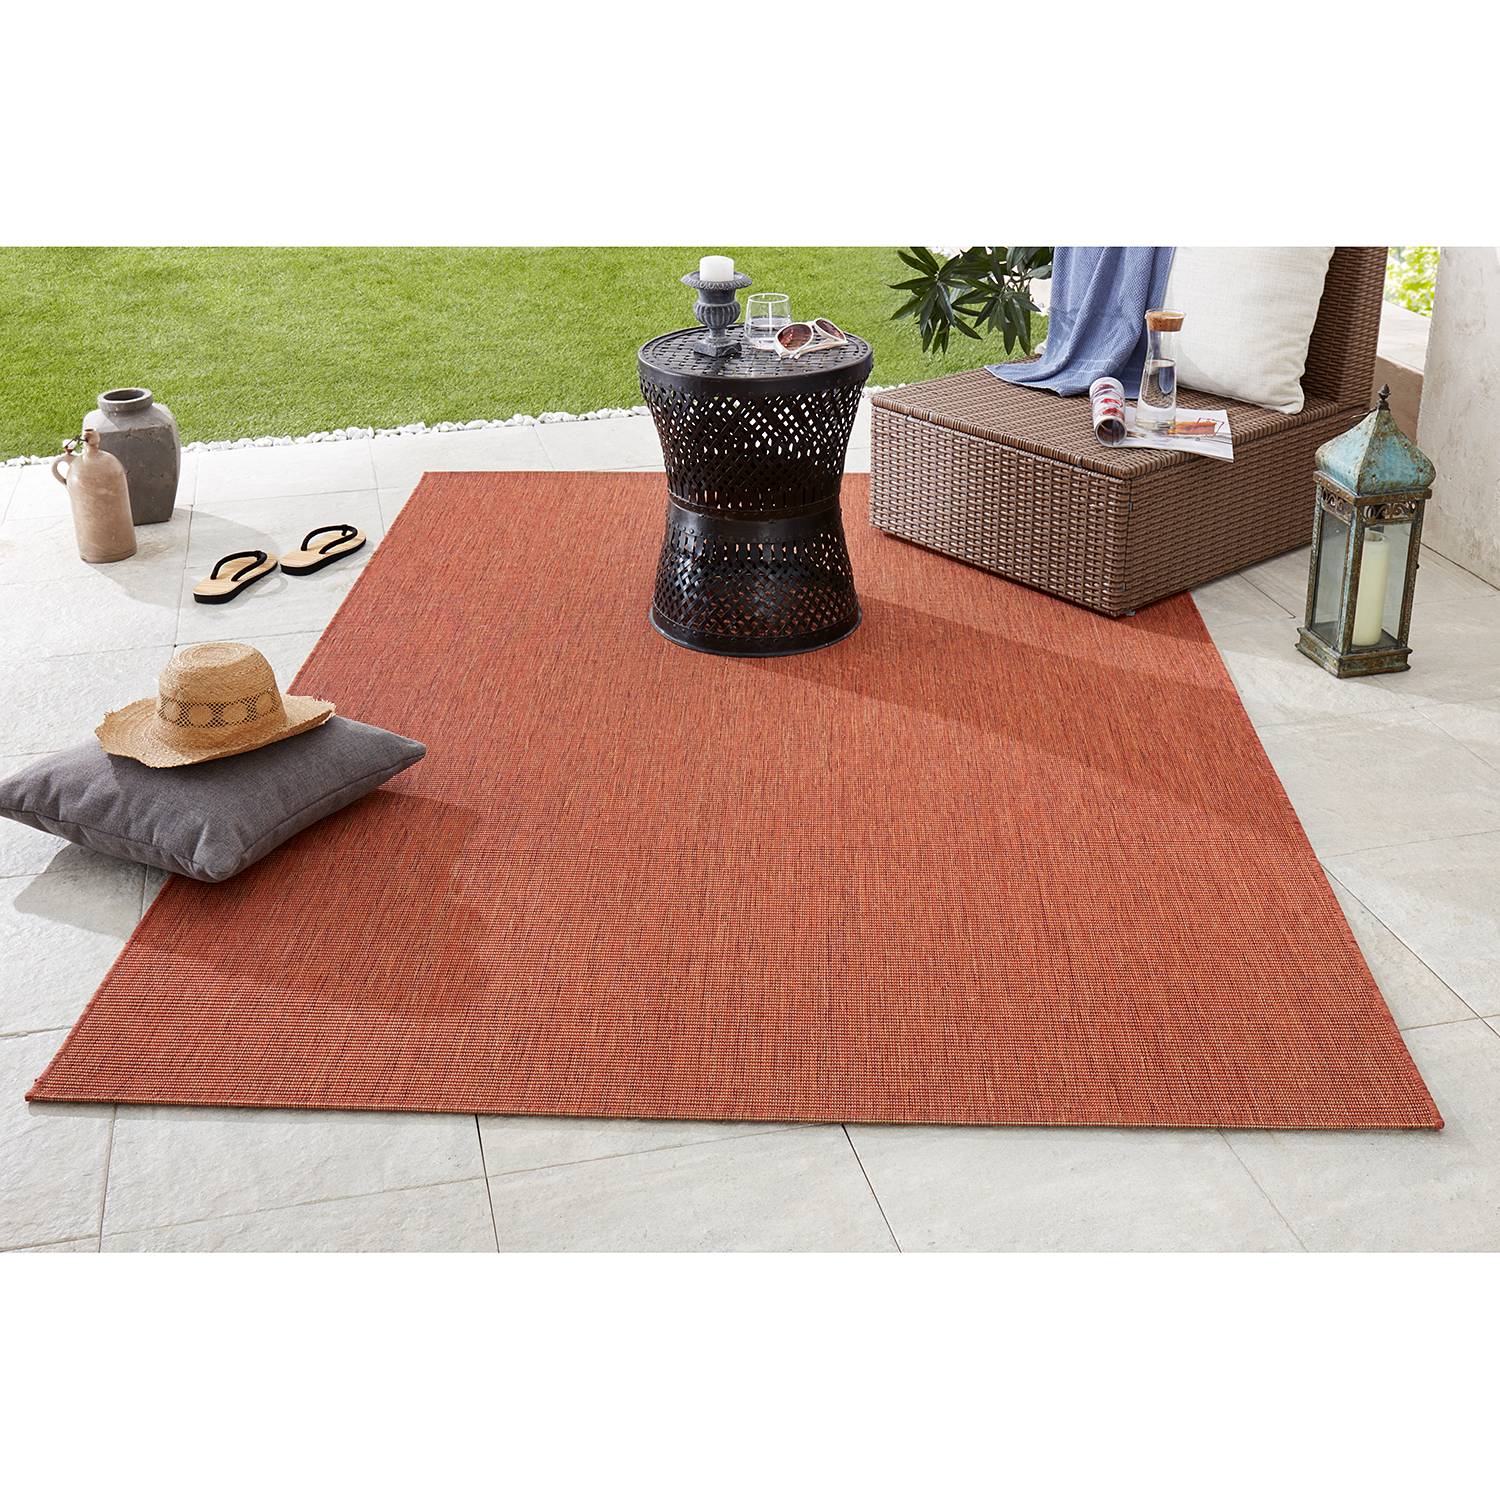 Northrugs In-/Outdoor-Teppich Match